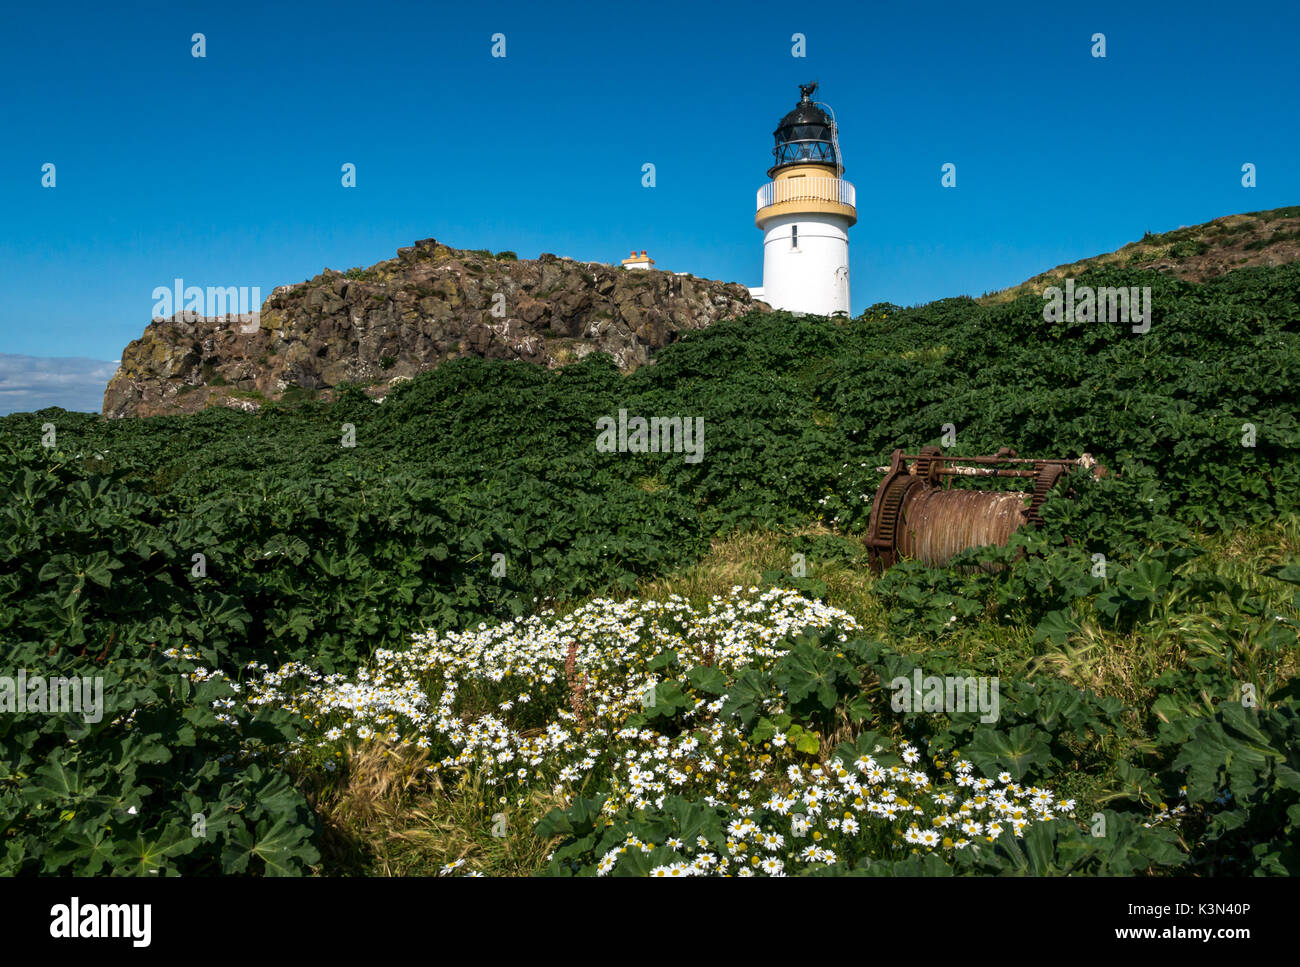 View of Stevenson Lighthouse, Fidra Island, Firth of Forth, Scotland, UK, built by the Northern Lighthouse Board on sunny day with blue sky Stock Photo